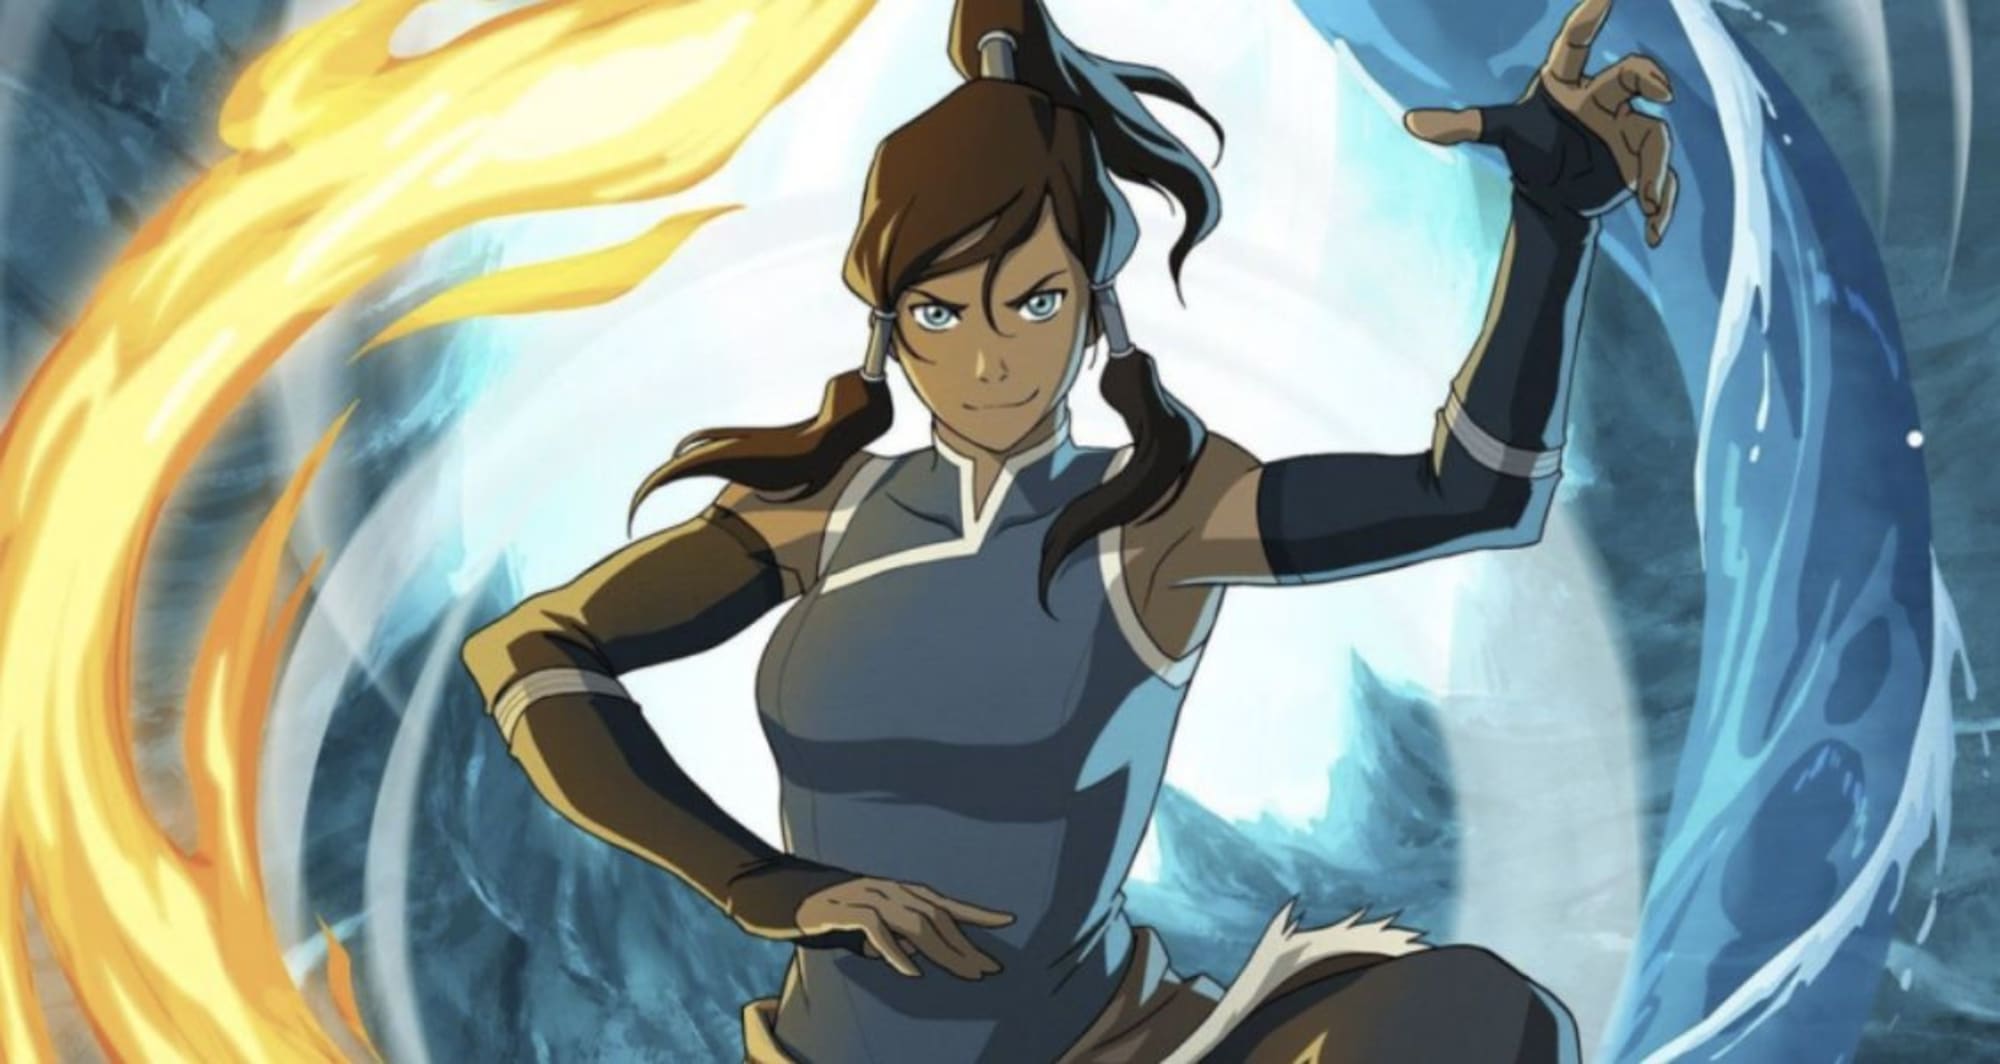 New Avatar: The Last Airbender show set after The Legend of Korra is coming